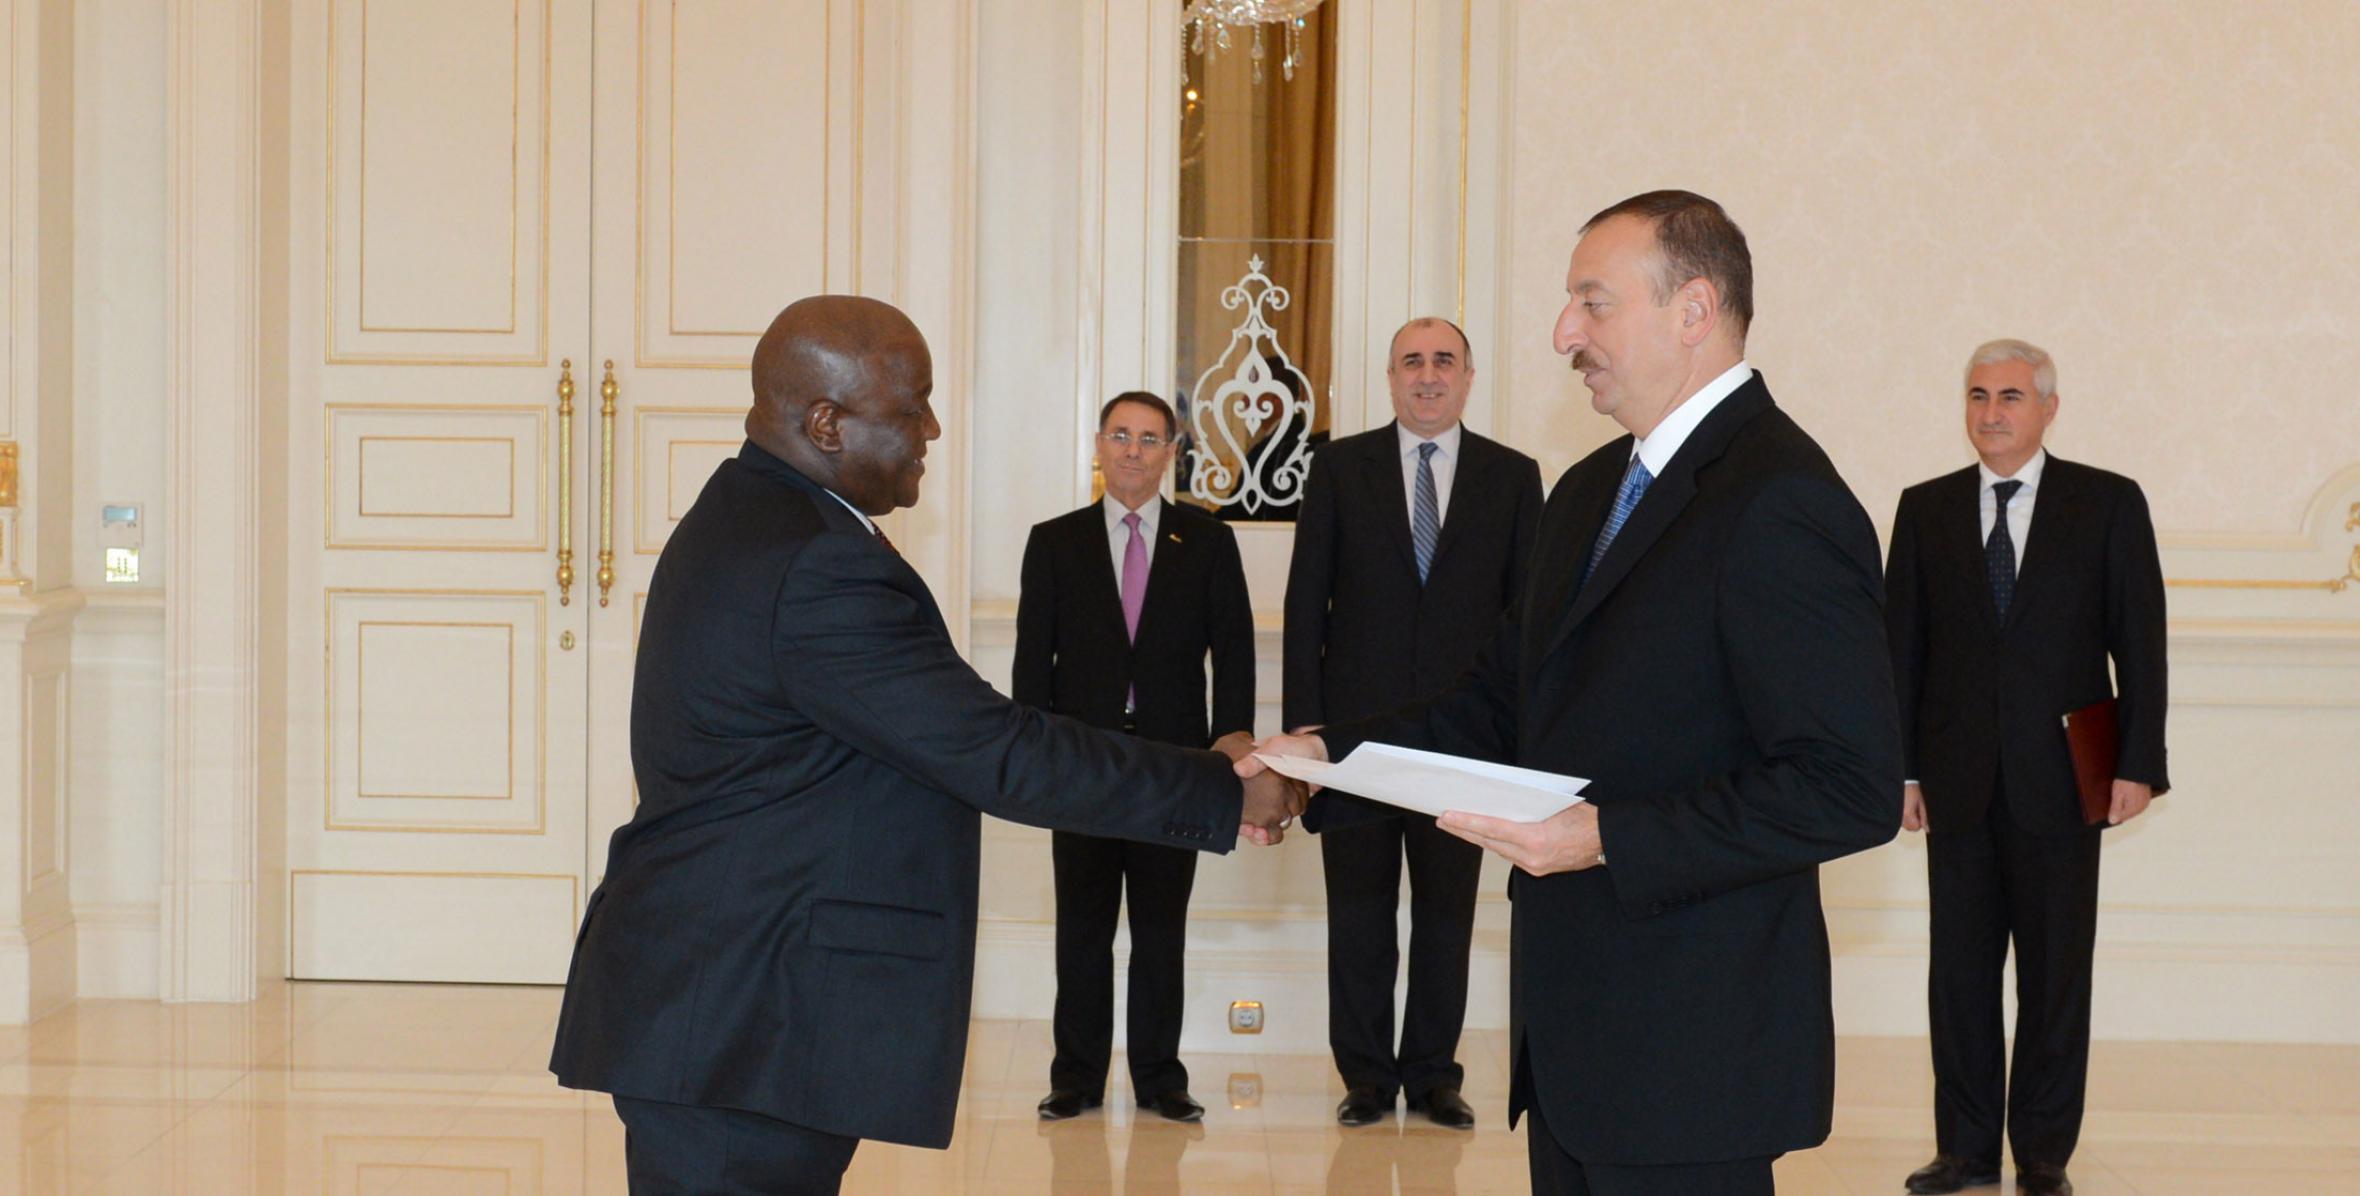 Ilham Aliyev accepted the credentials from the newly-appointed Ambassador of the Republic of South Africa to Azerbaijan